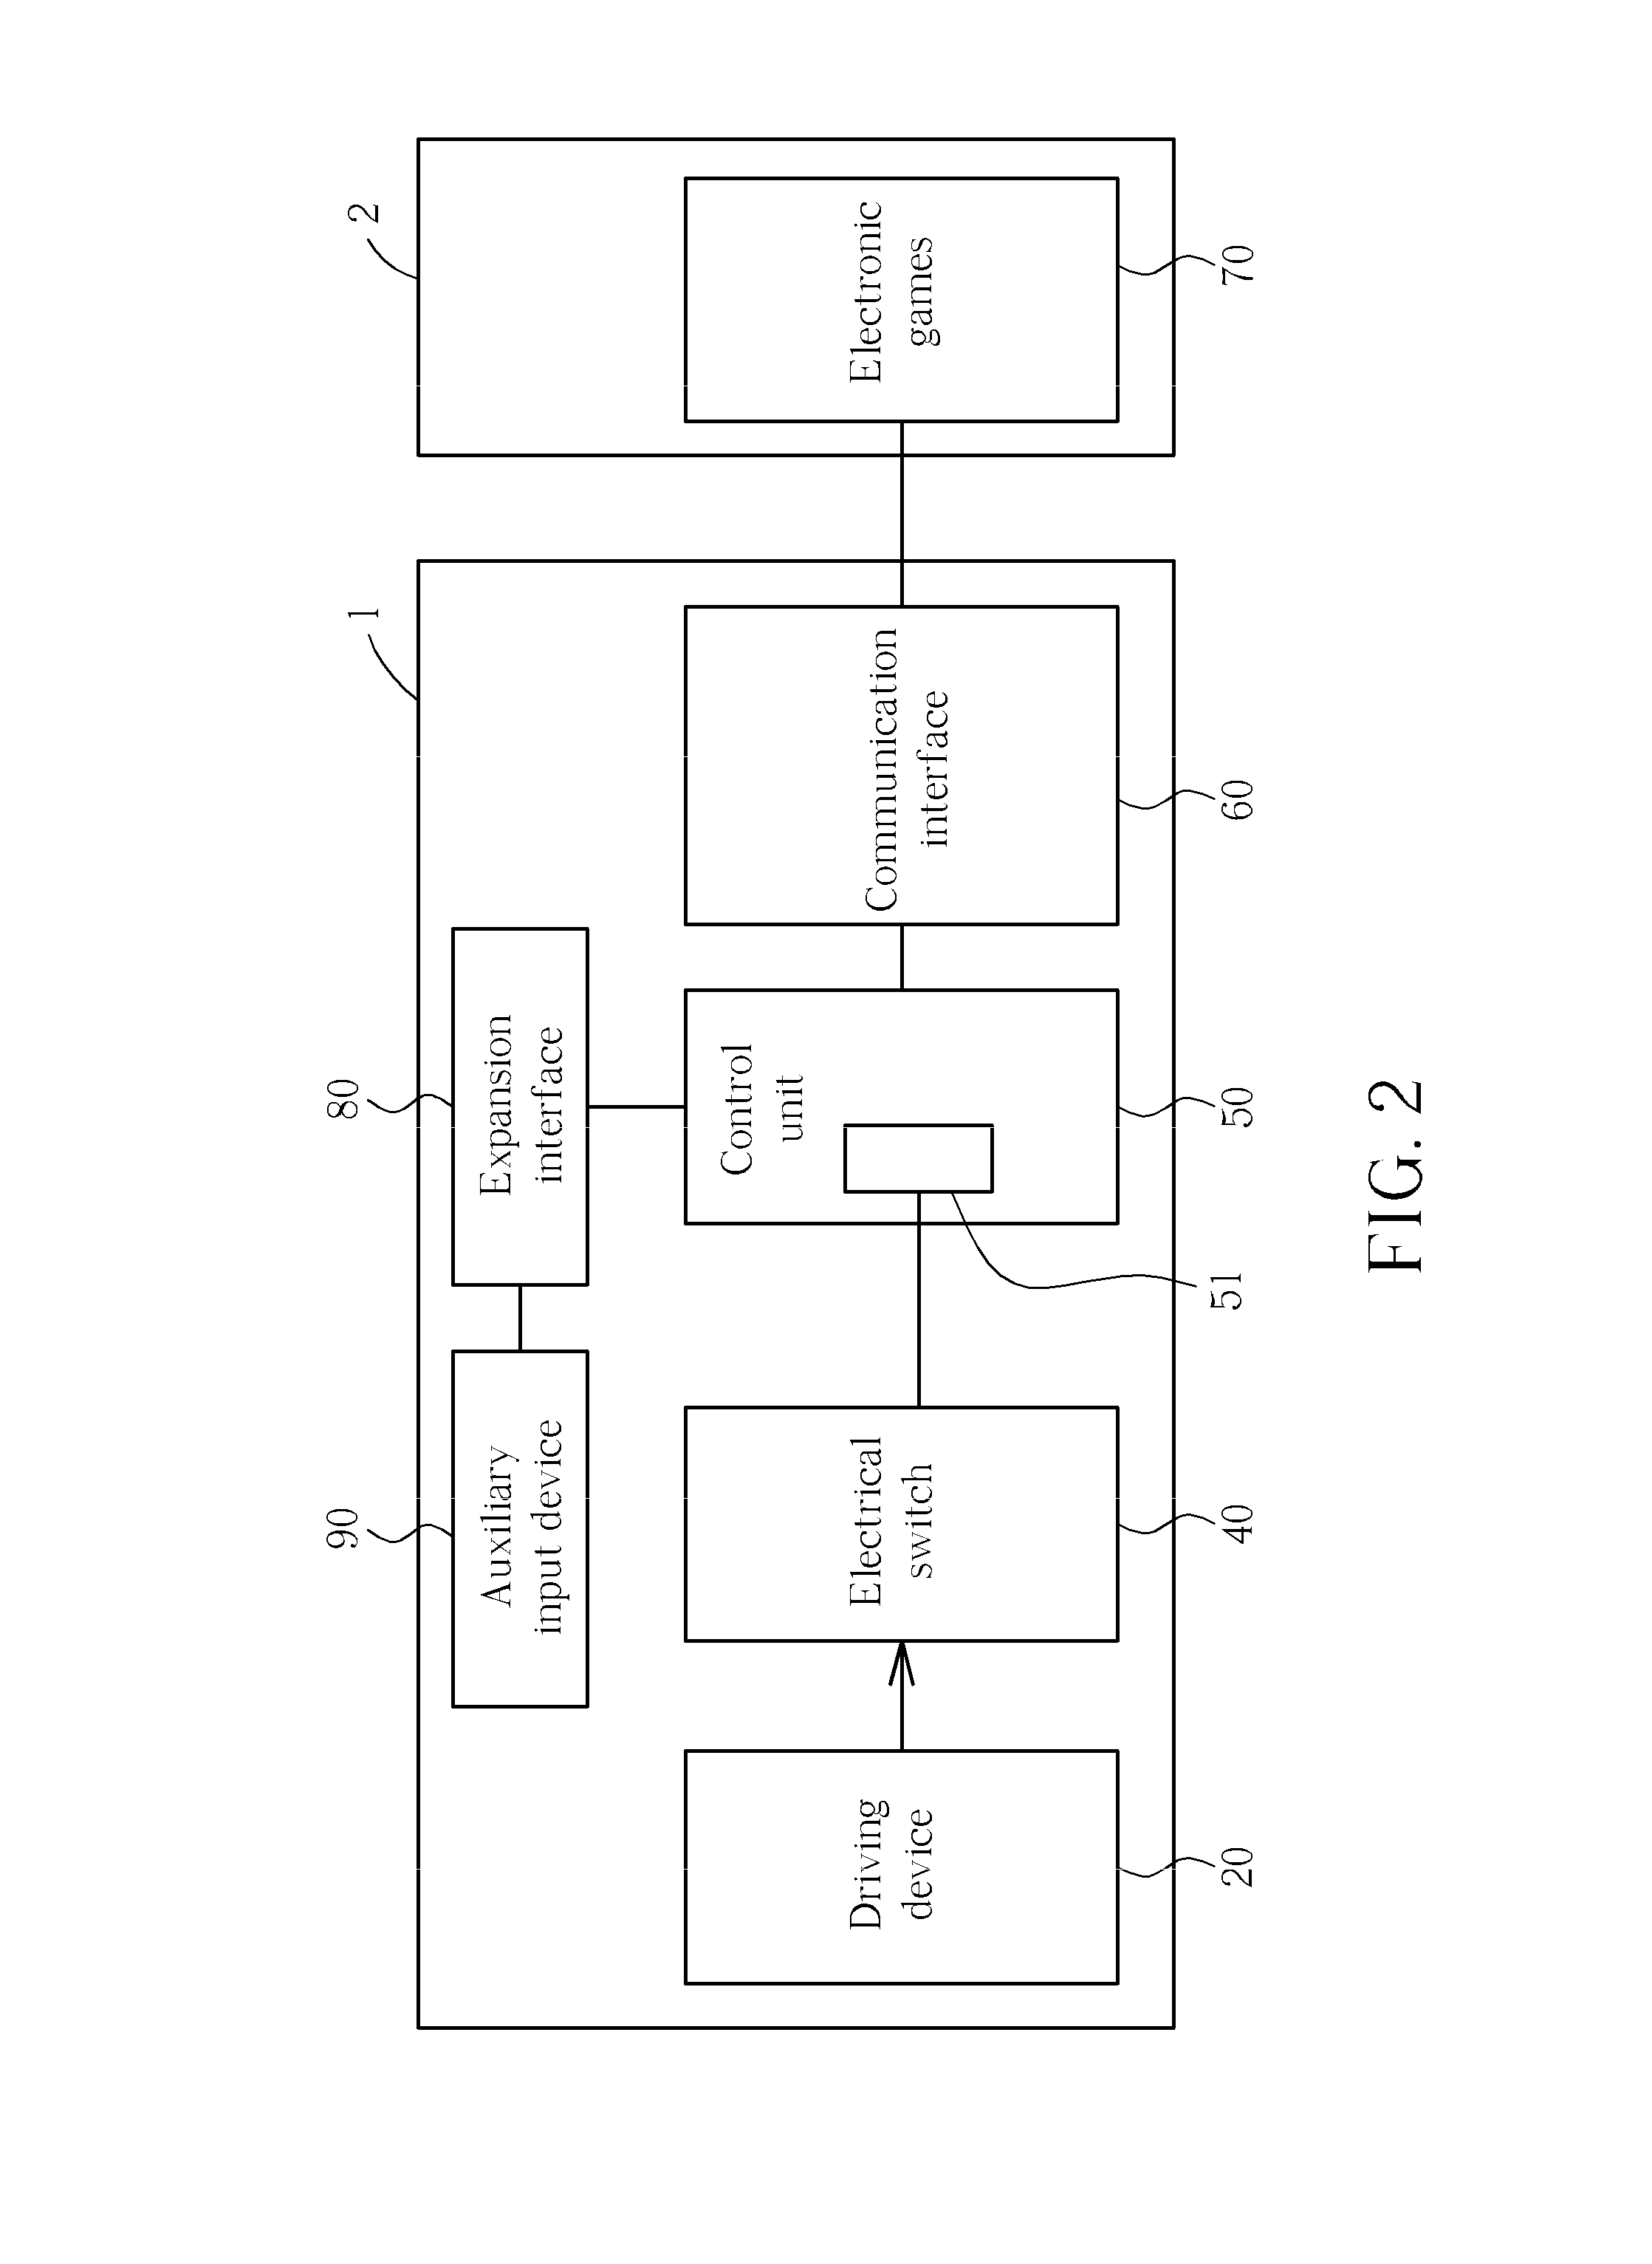 Fitness equipment incorporated with content control of an electronic device